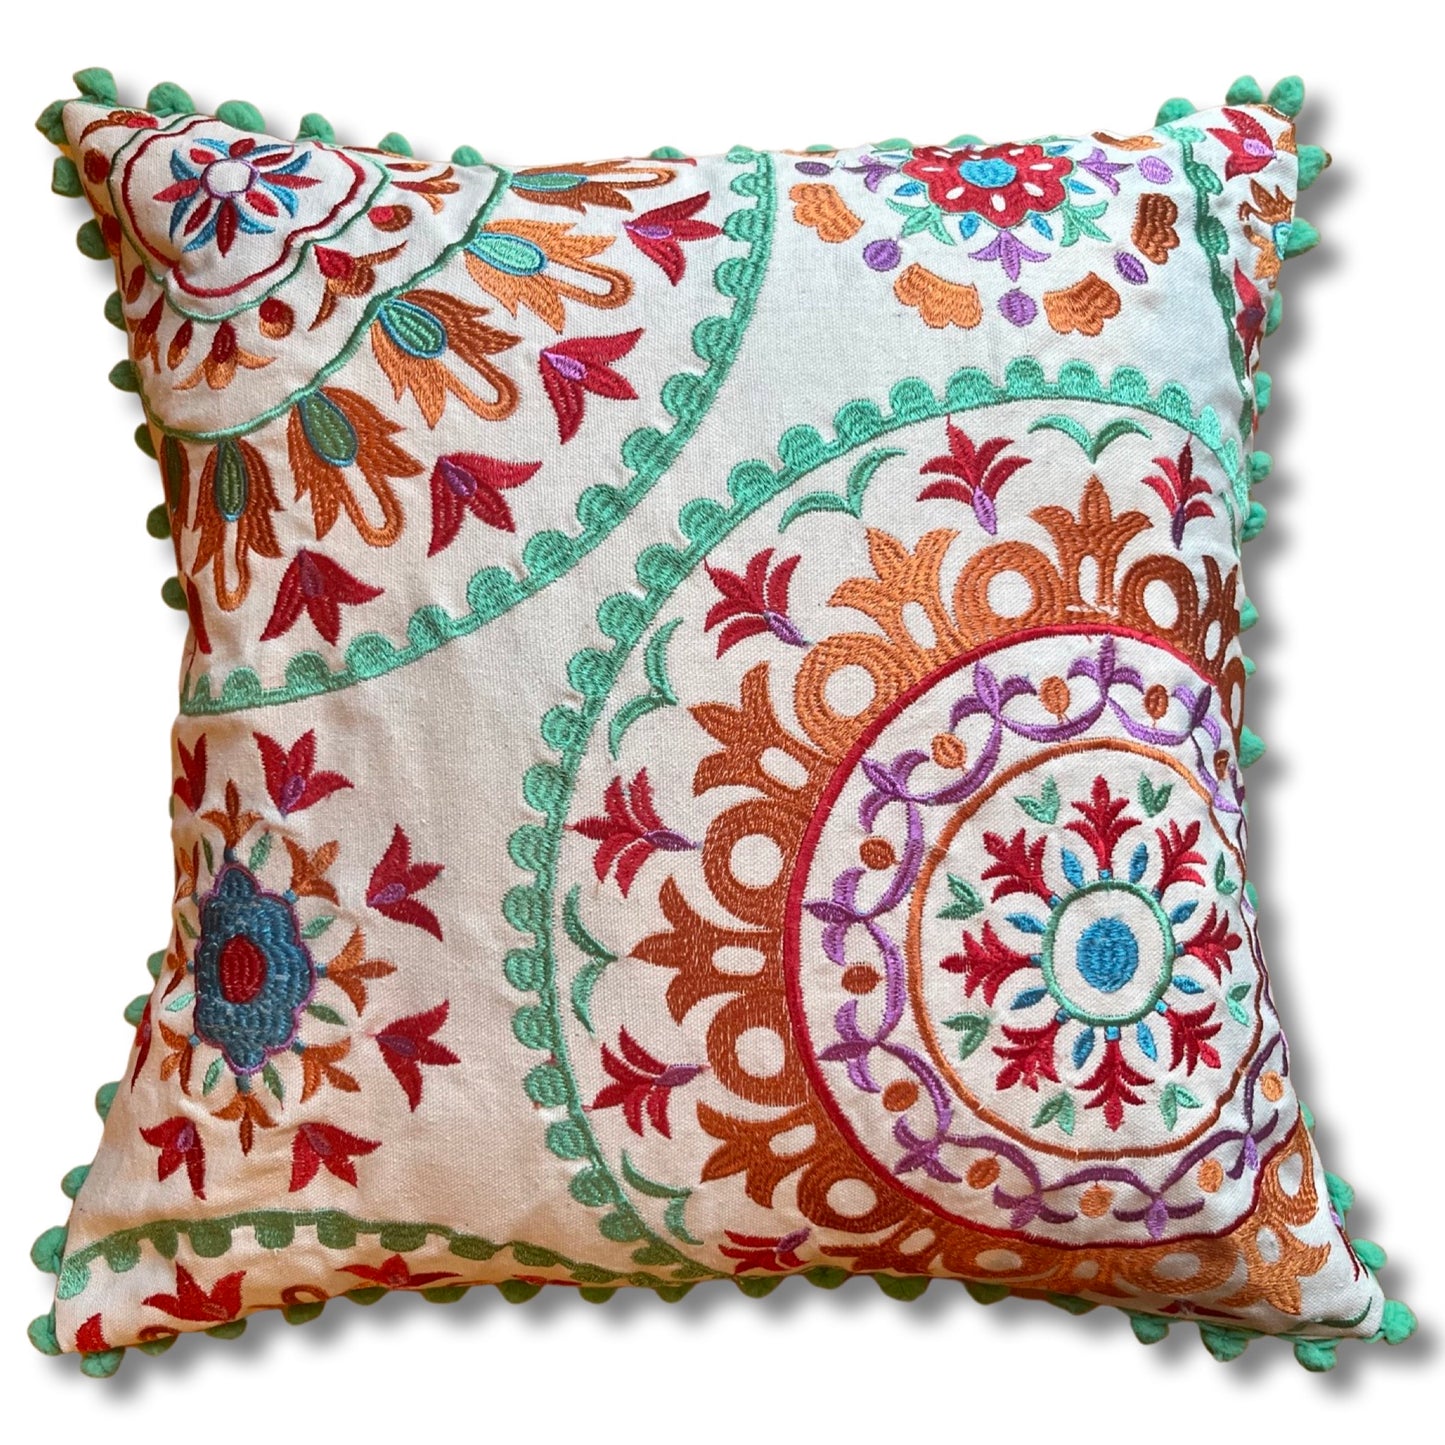 Embroidered Suzani Pom Pom Cushion Cover - Tulips